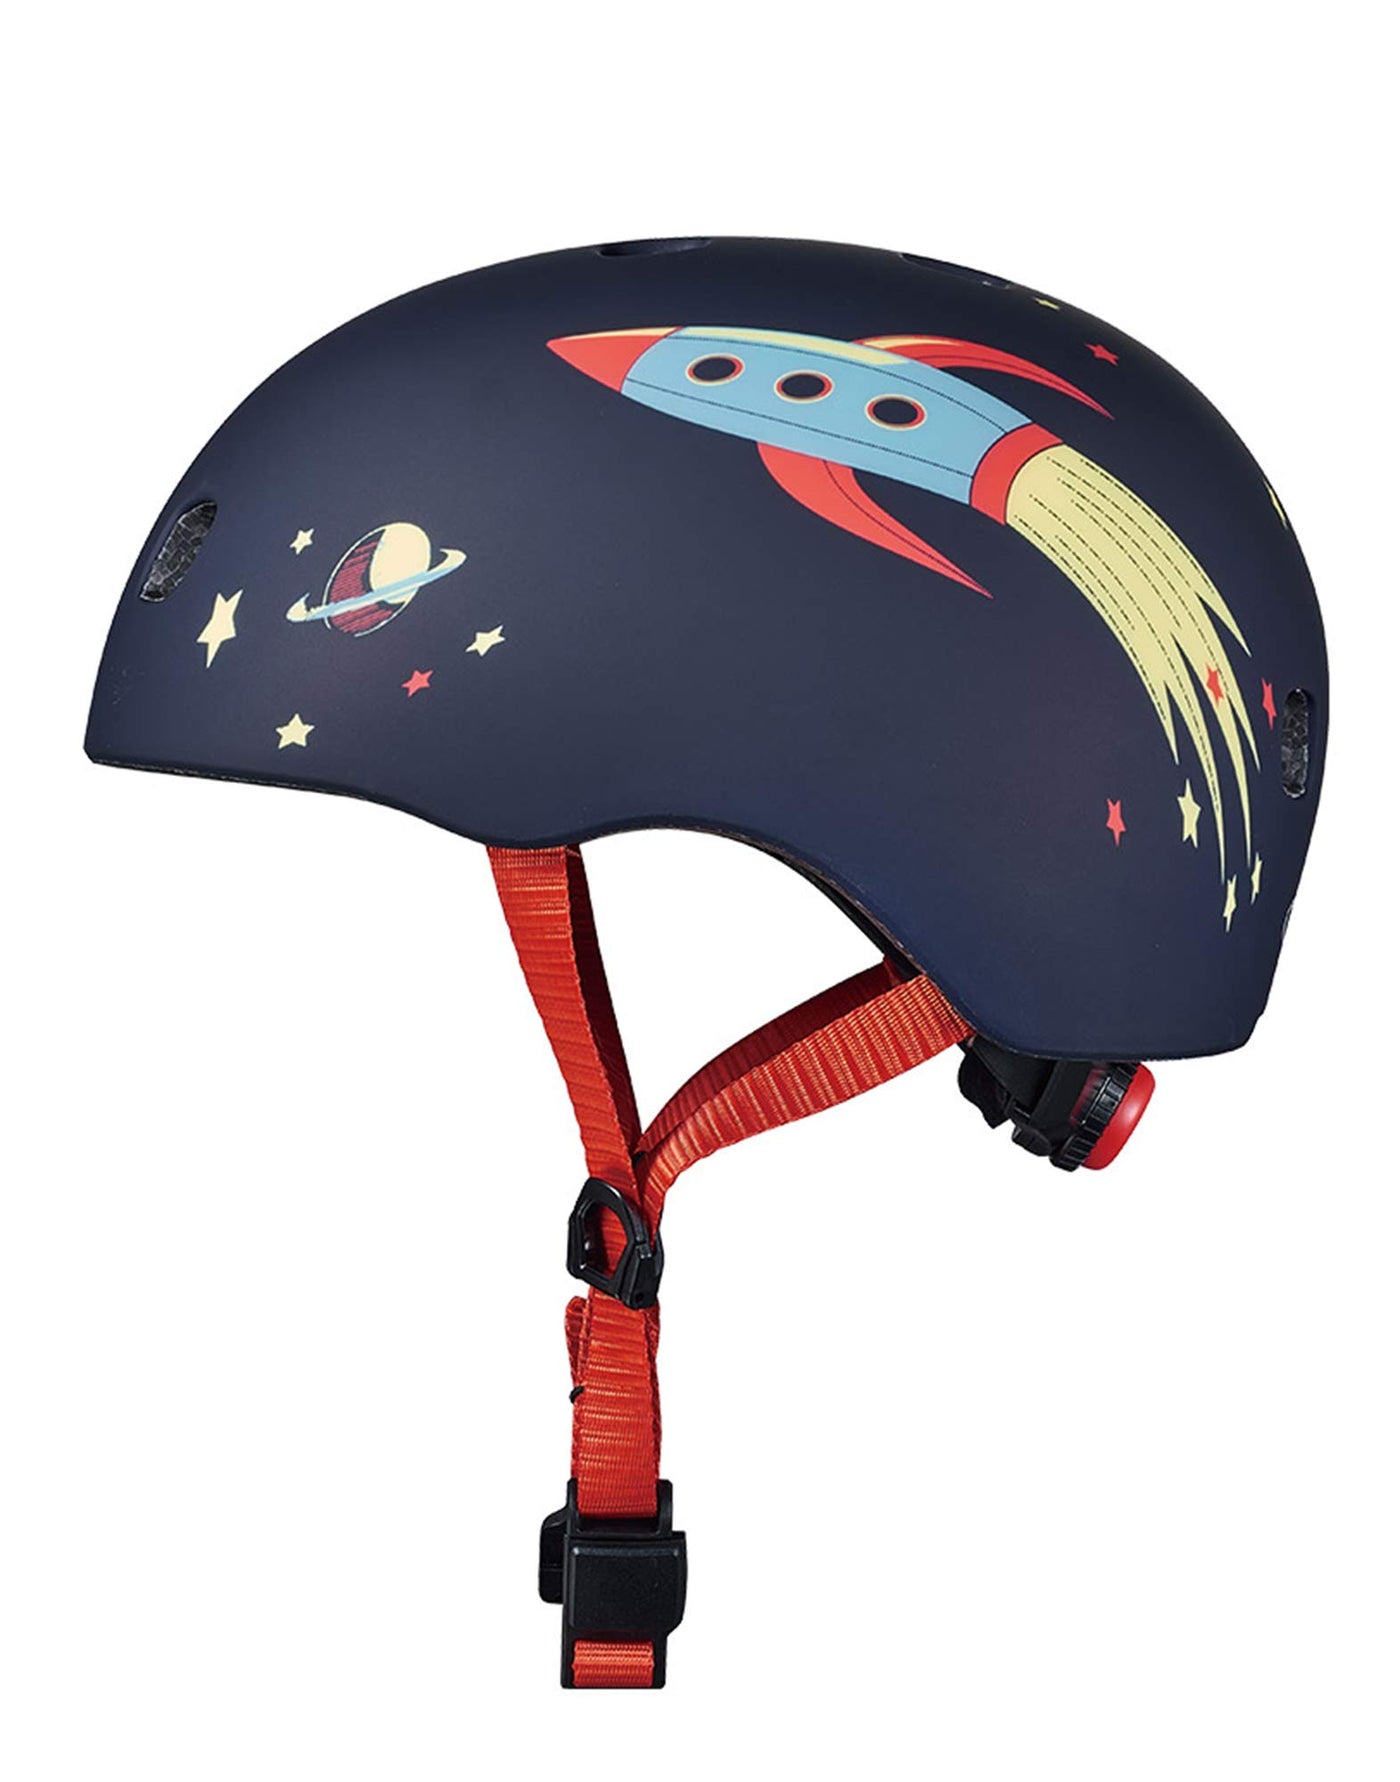 micro scooter rocket patterned helmet side view